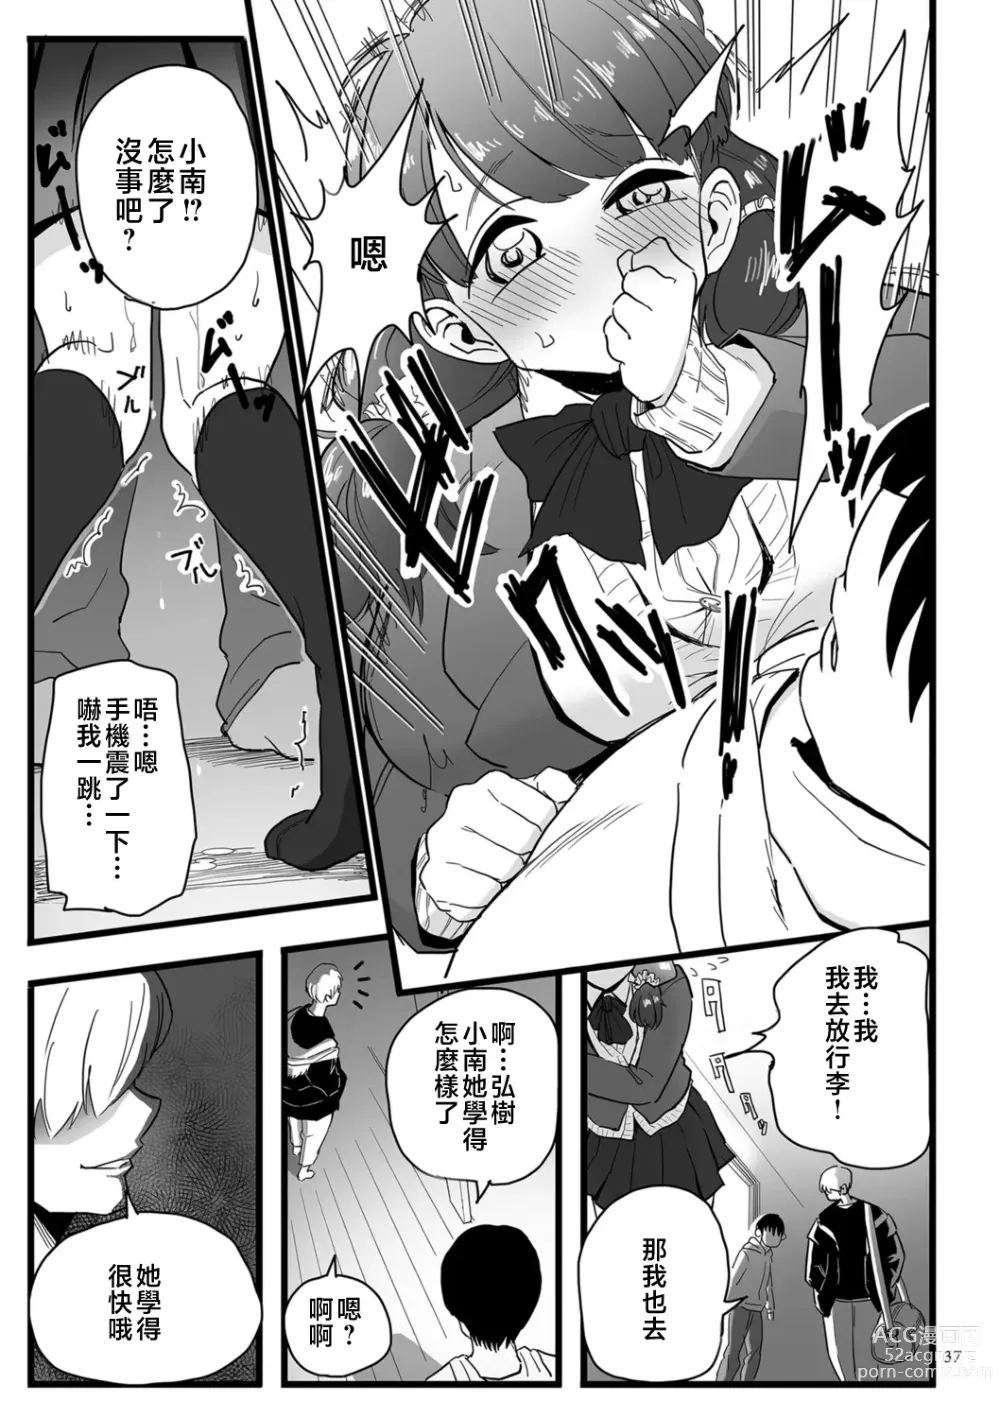 Page 37 of manga Mesu Dorei Sengen - A chain of nightmares, Six heroines become ME DOREI in front of a big, strong cxxk...?